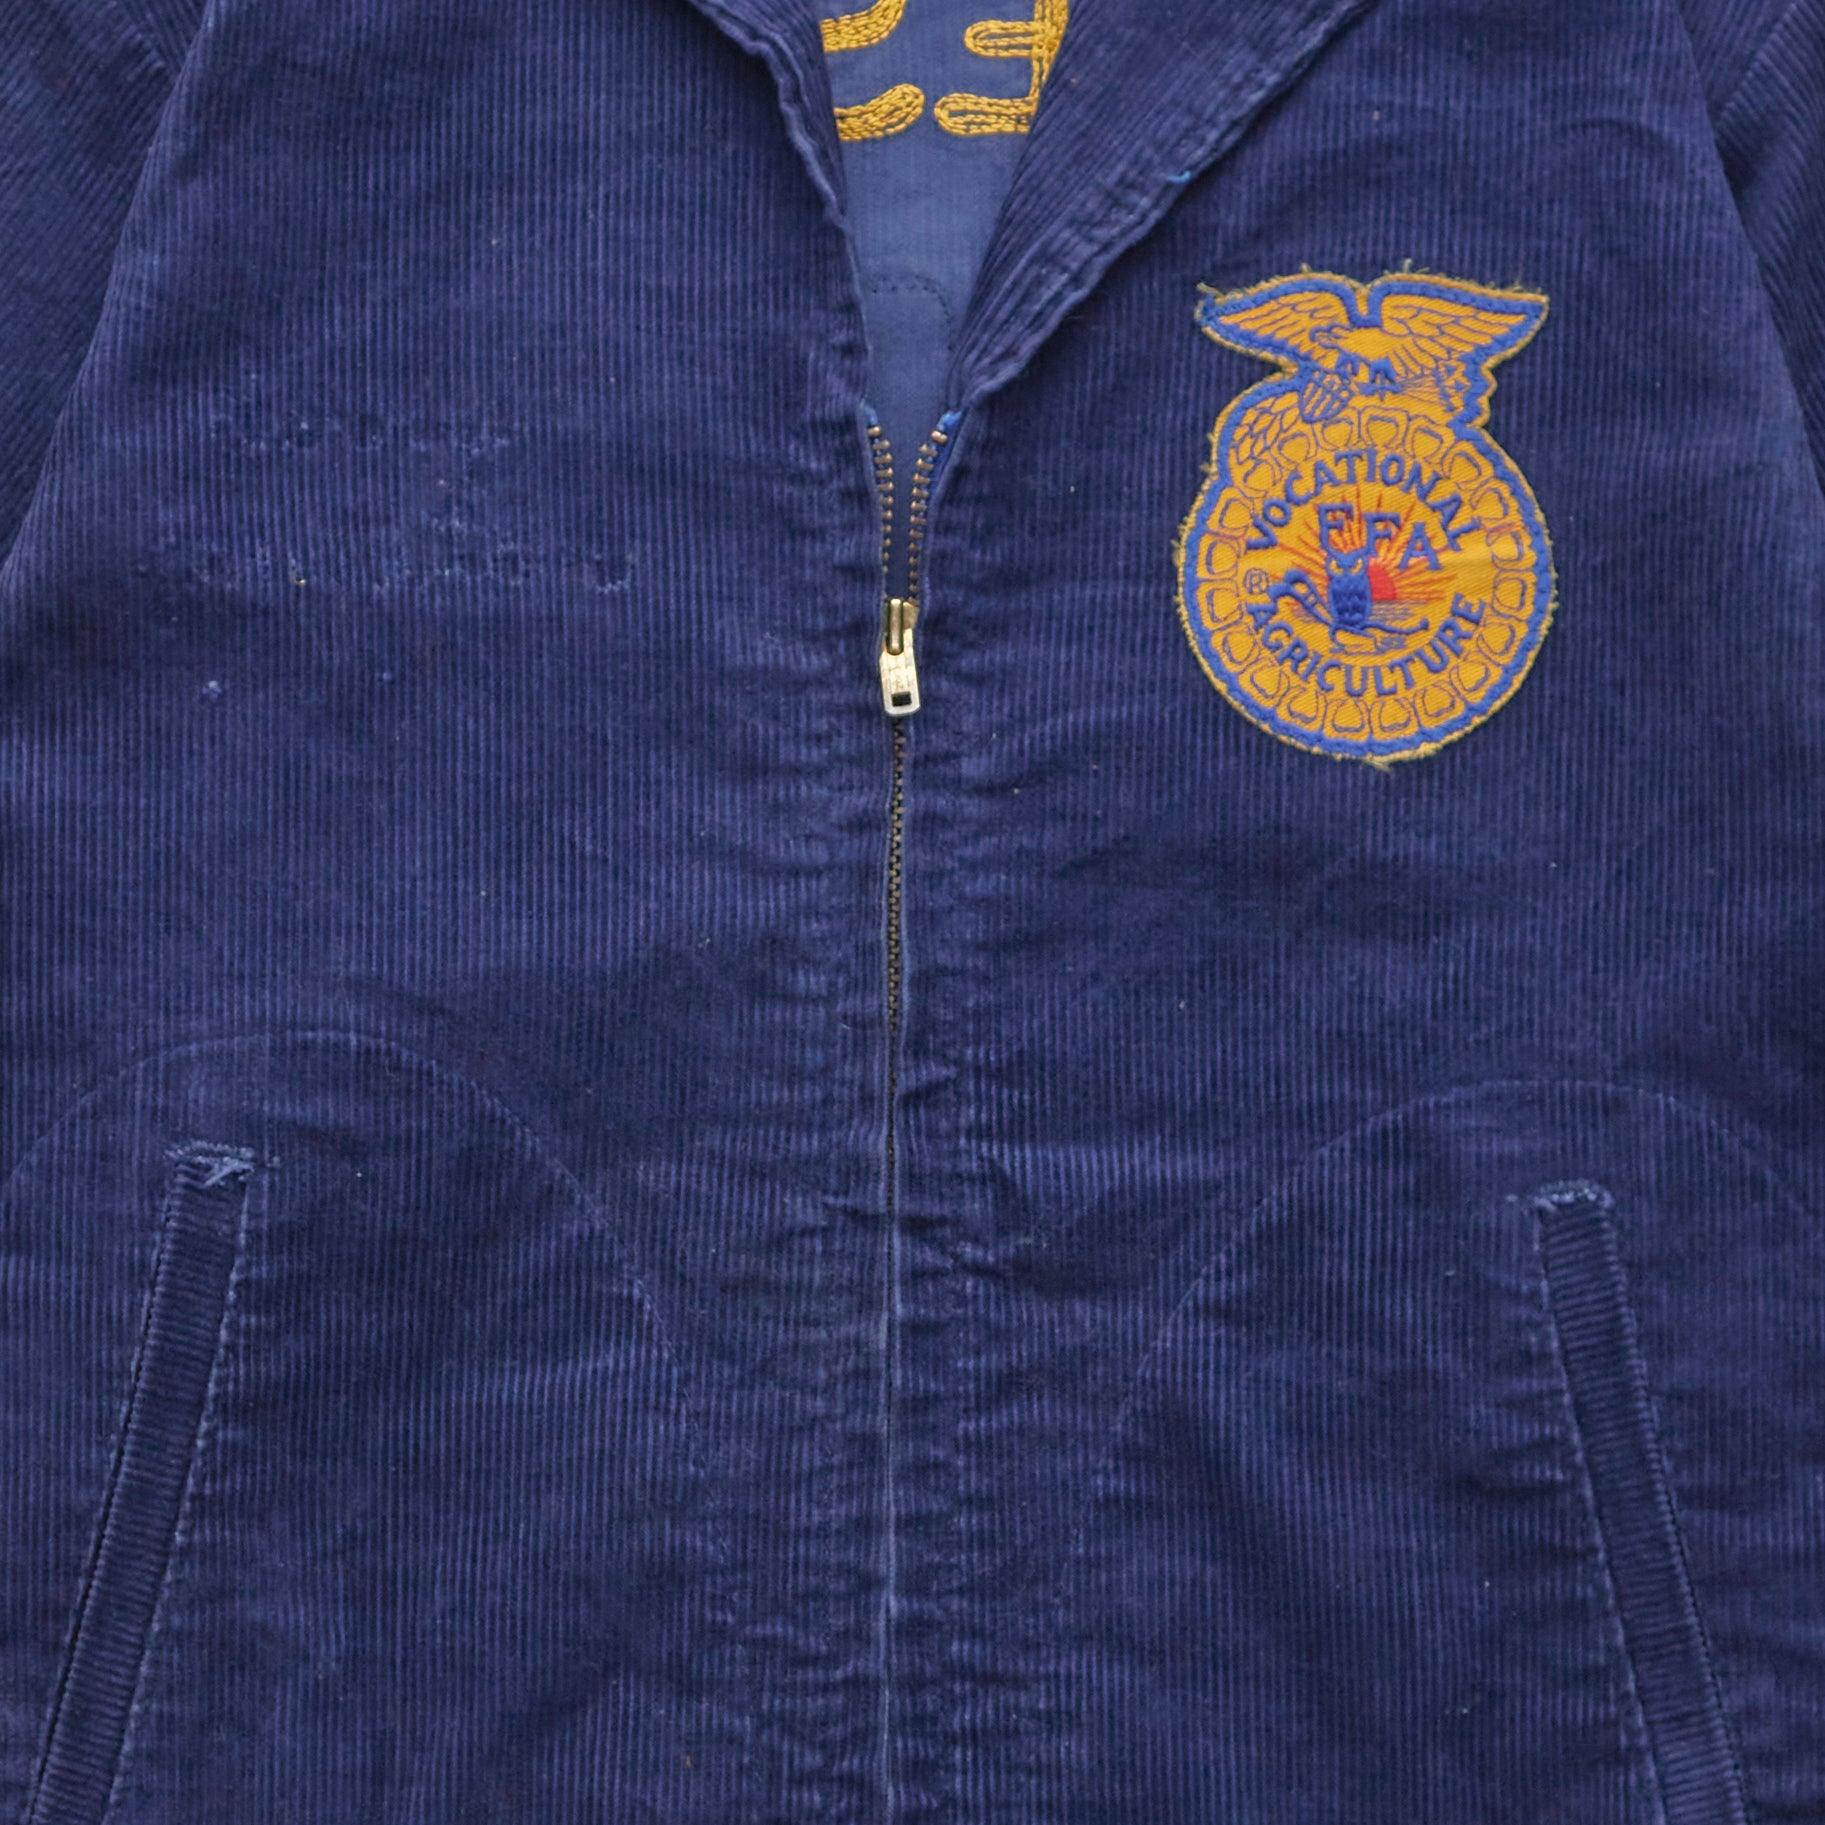 (S) 90s Tennessee FFA Jacket